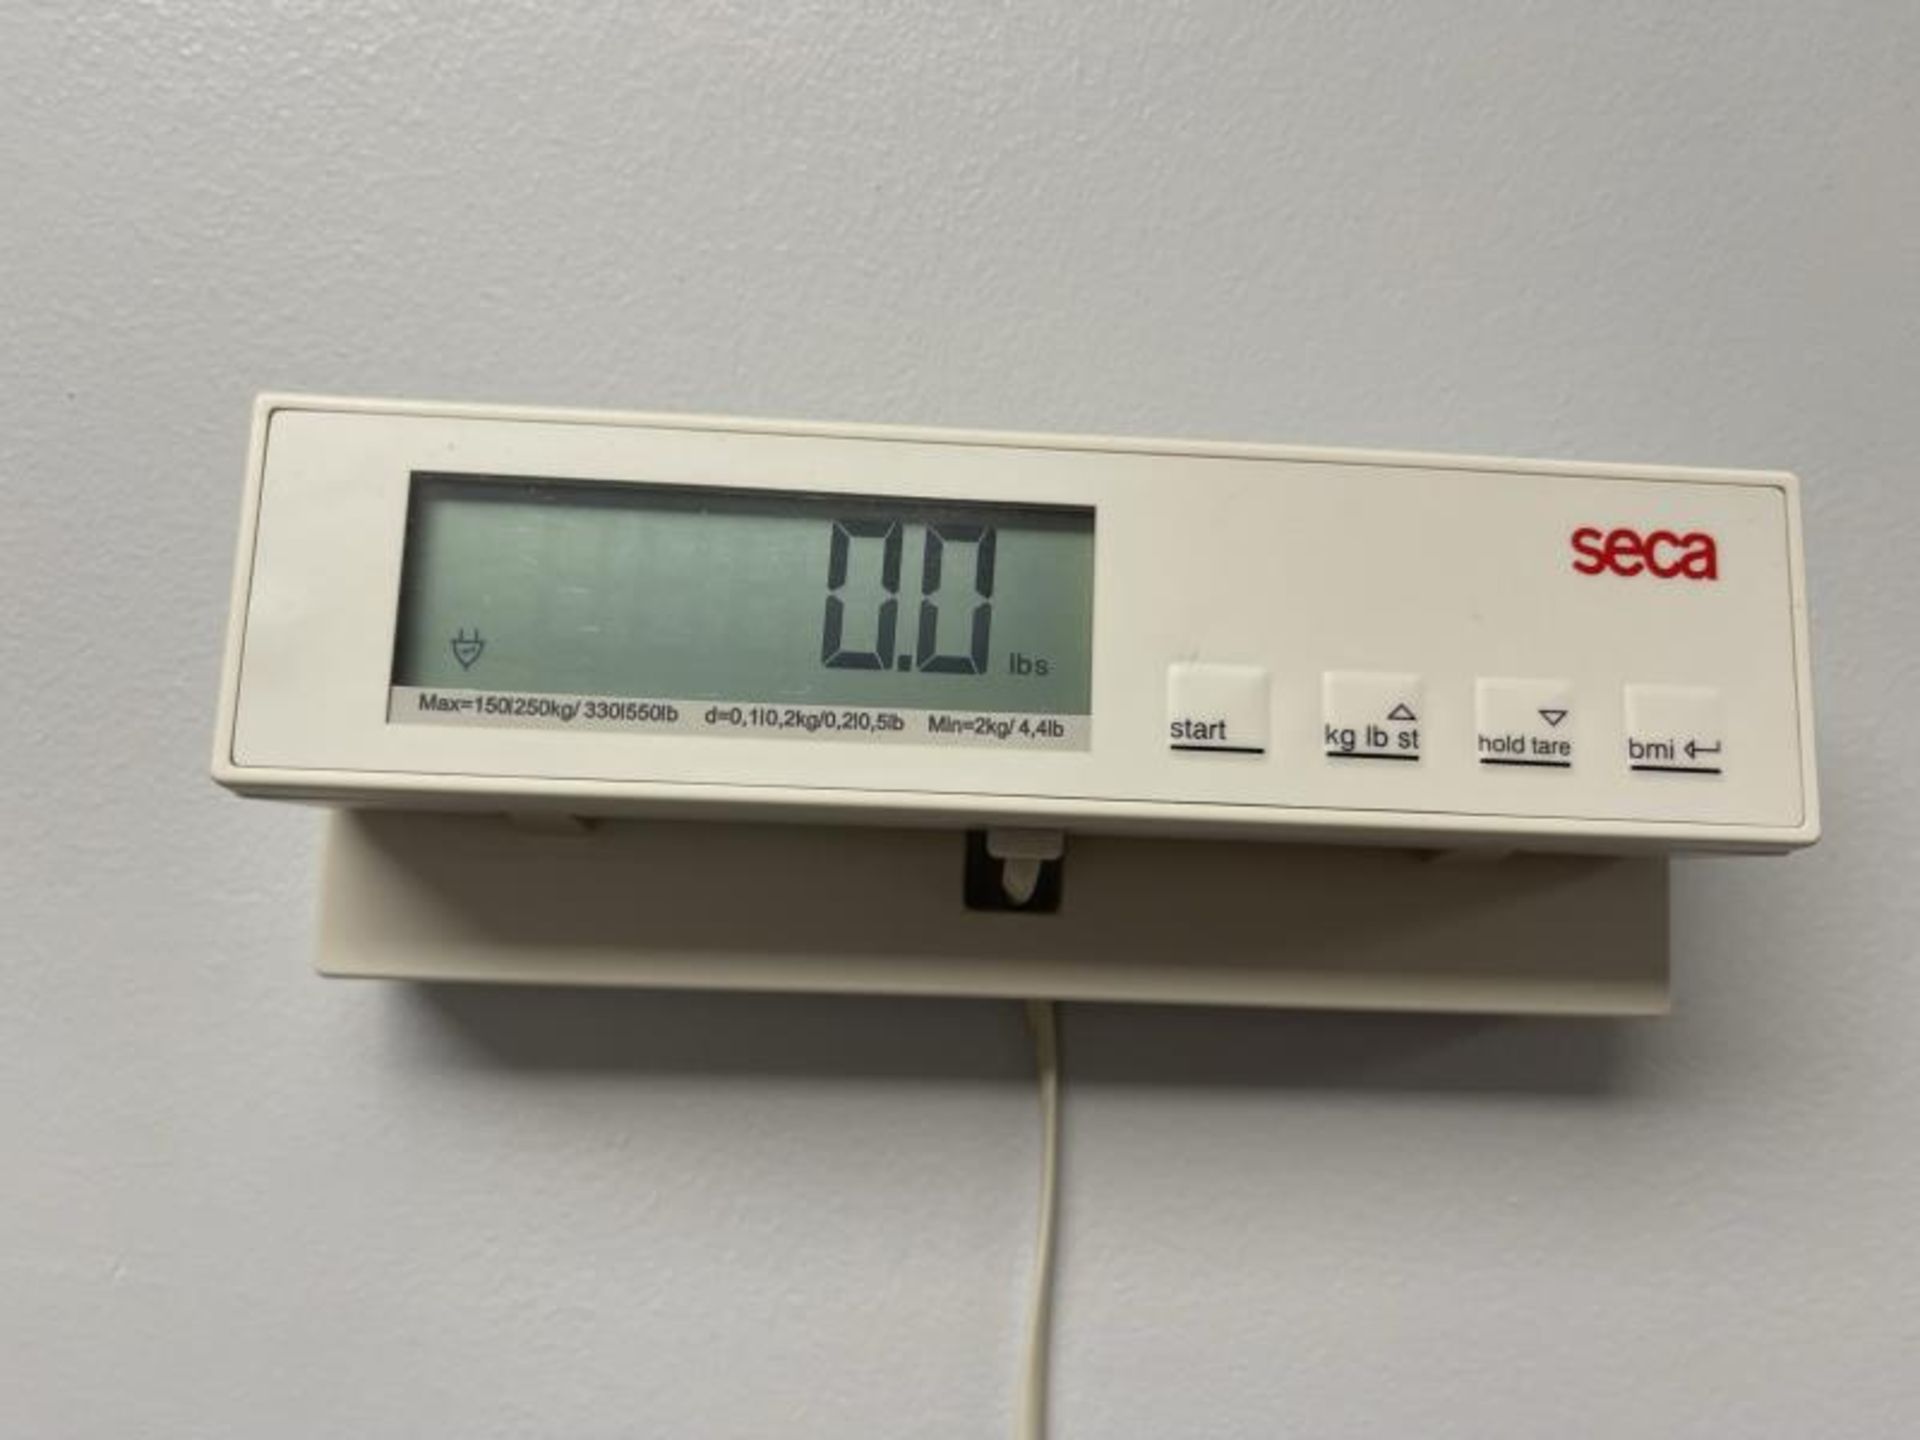 Seca Platform Scale w/ Wall Mount Readout, 550lbs - Image 2 of 3